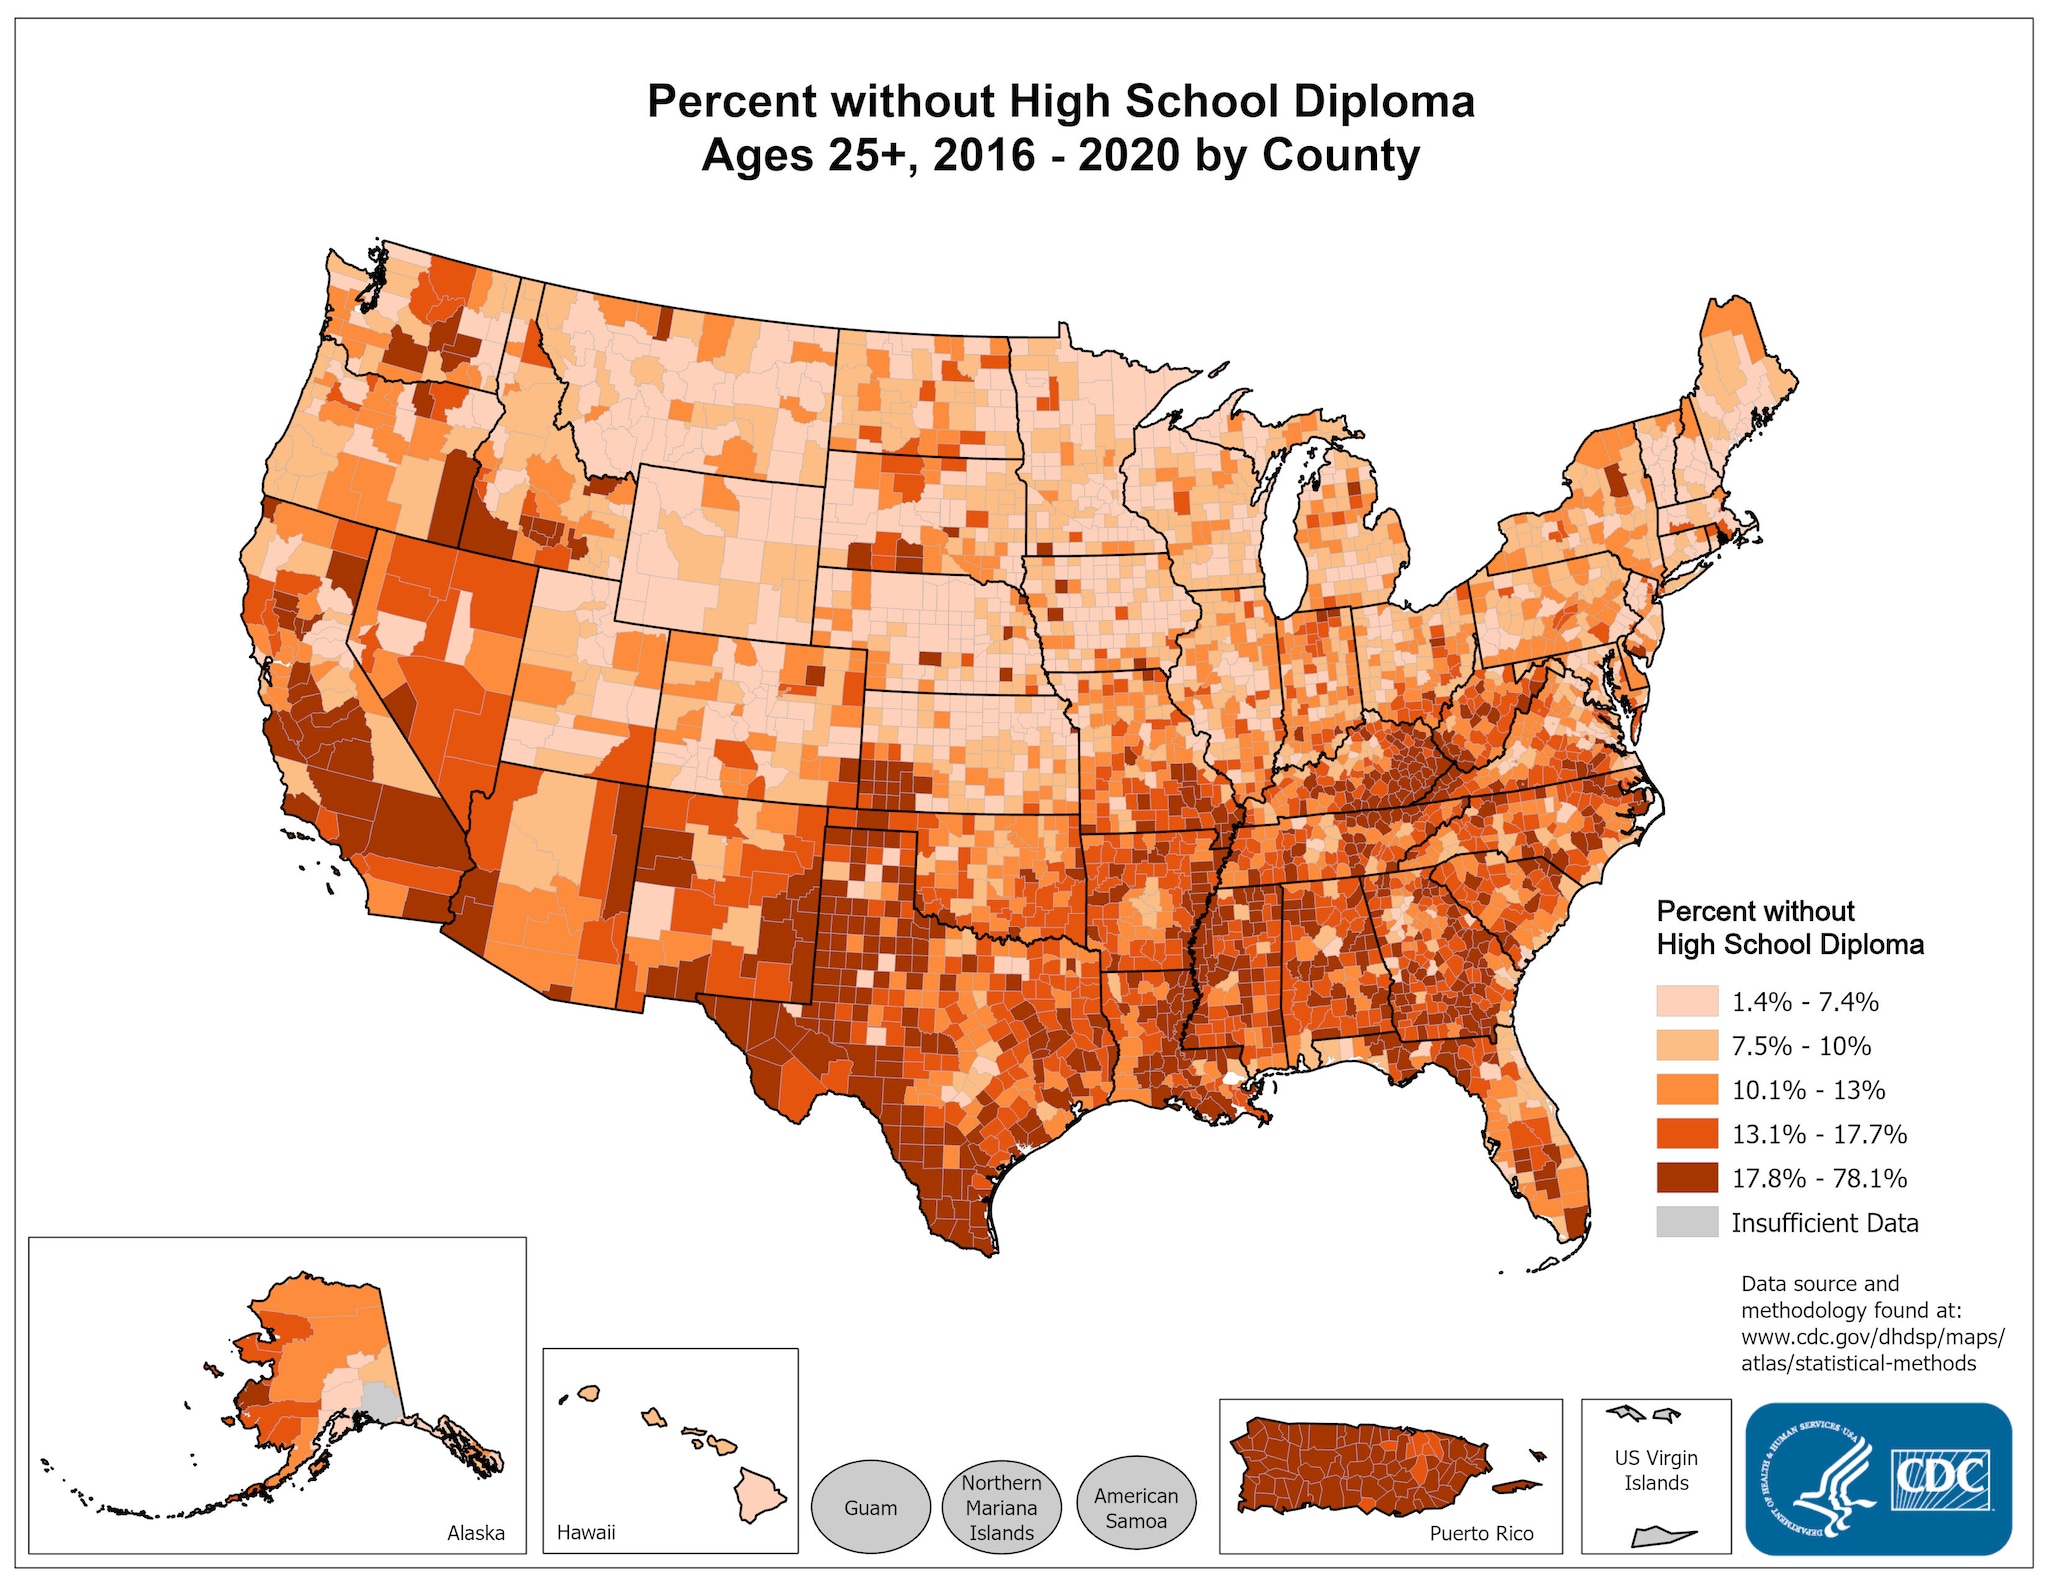 Percentage without High School Diploma Ages 25+, 2010-2014. Counties with the highest percentage without a high school diploma for 2010-2014 were located primarily in southwestern Texas, central California, the lower Mississippi River area, the Appalachian Region of Kentucky, and rural Alabama and Georgia. The range in the percentage of the population ages 25 and older with less than a high school degree was between 1.3% and 53.3%.